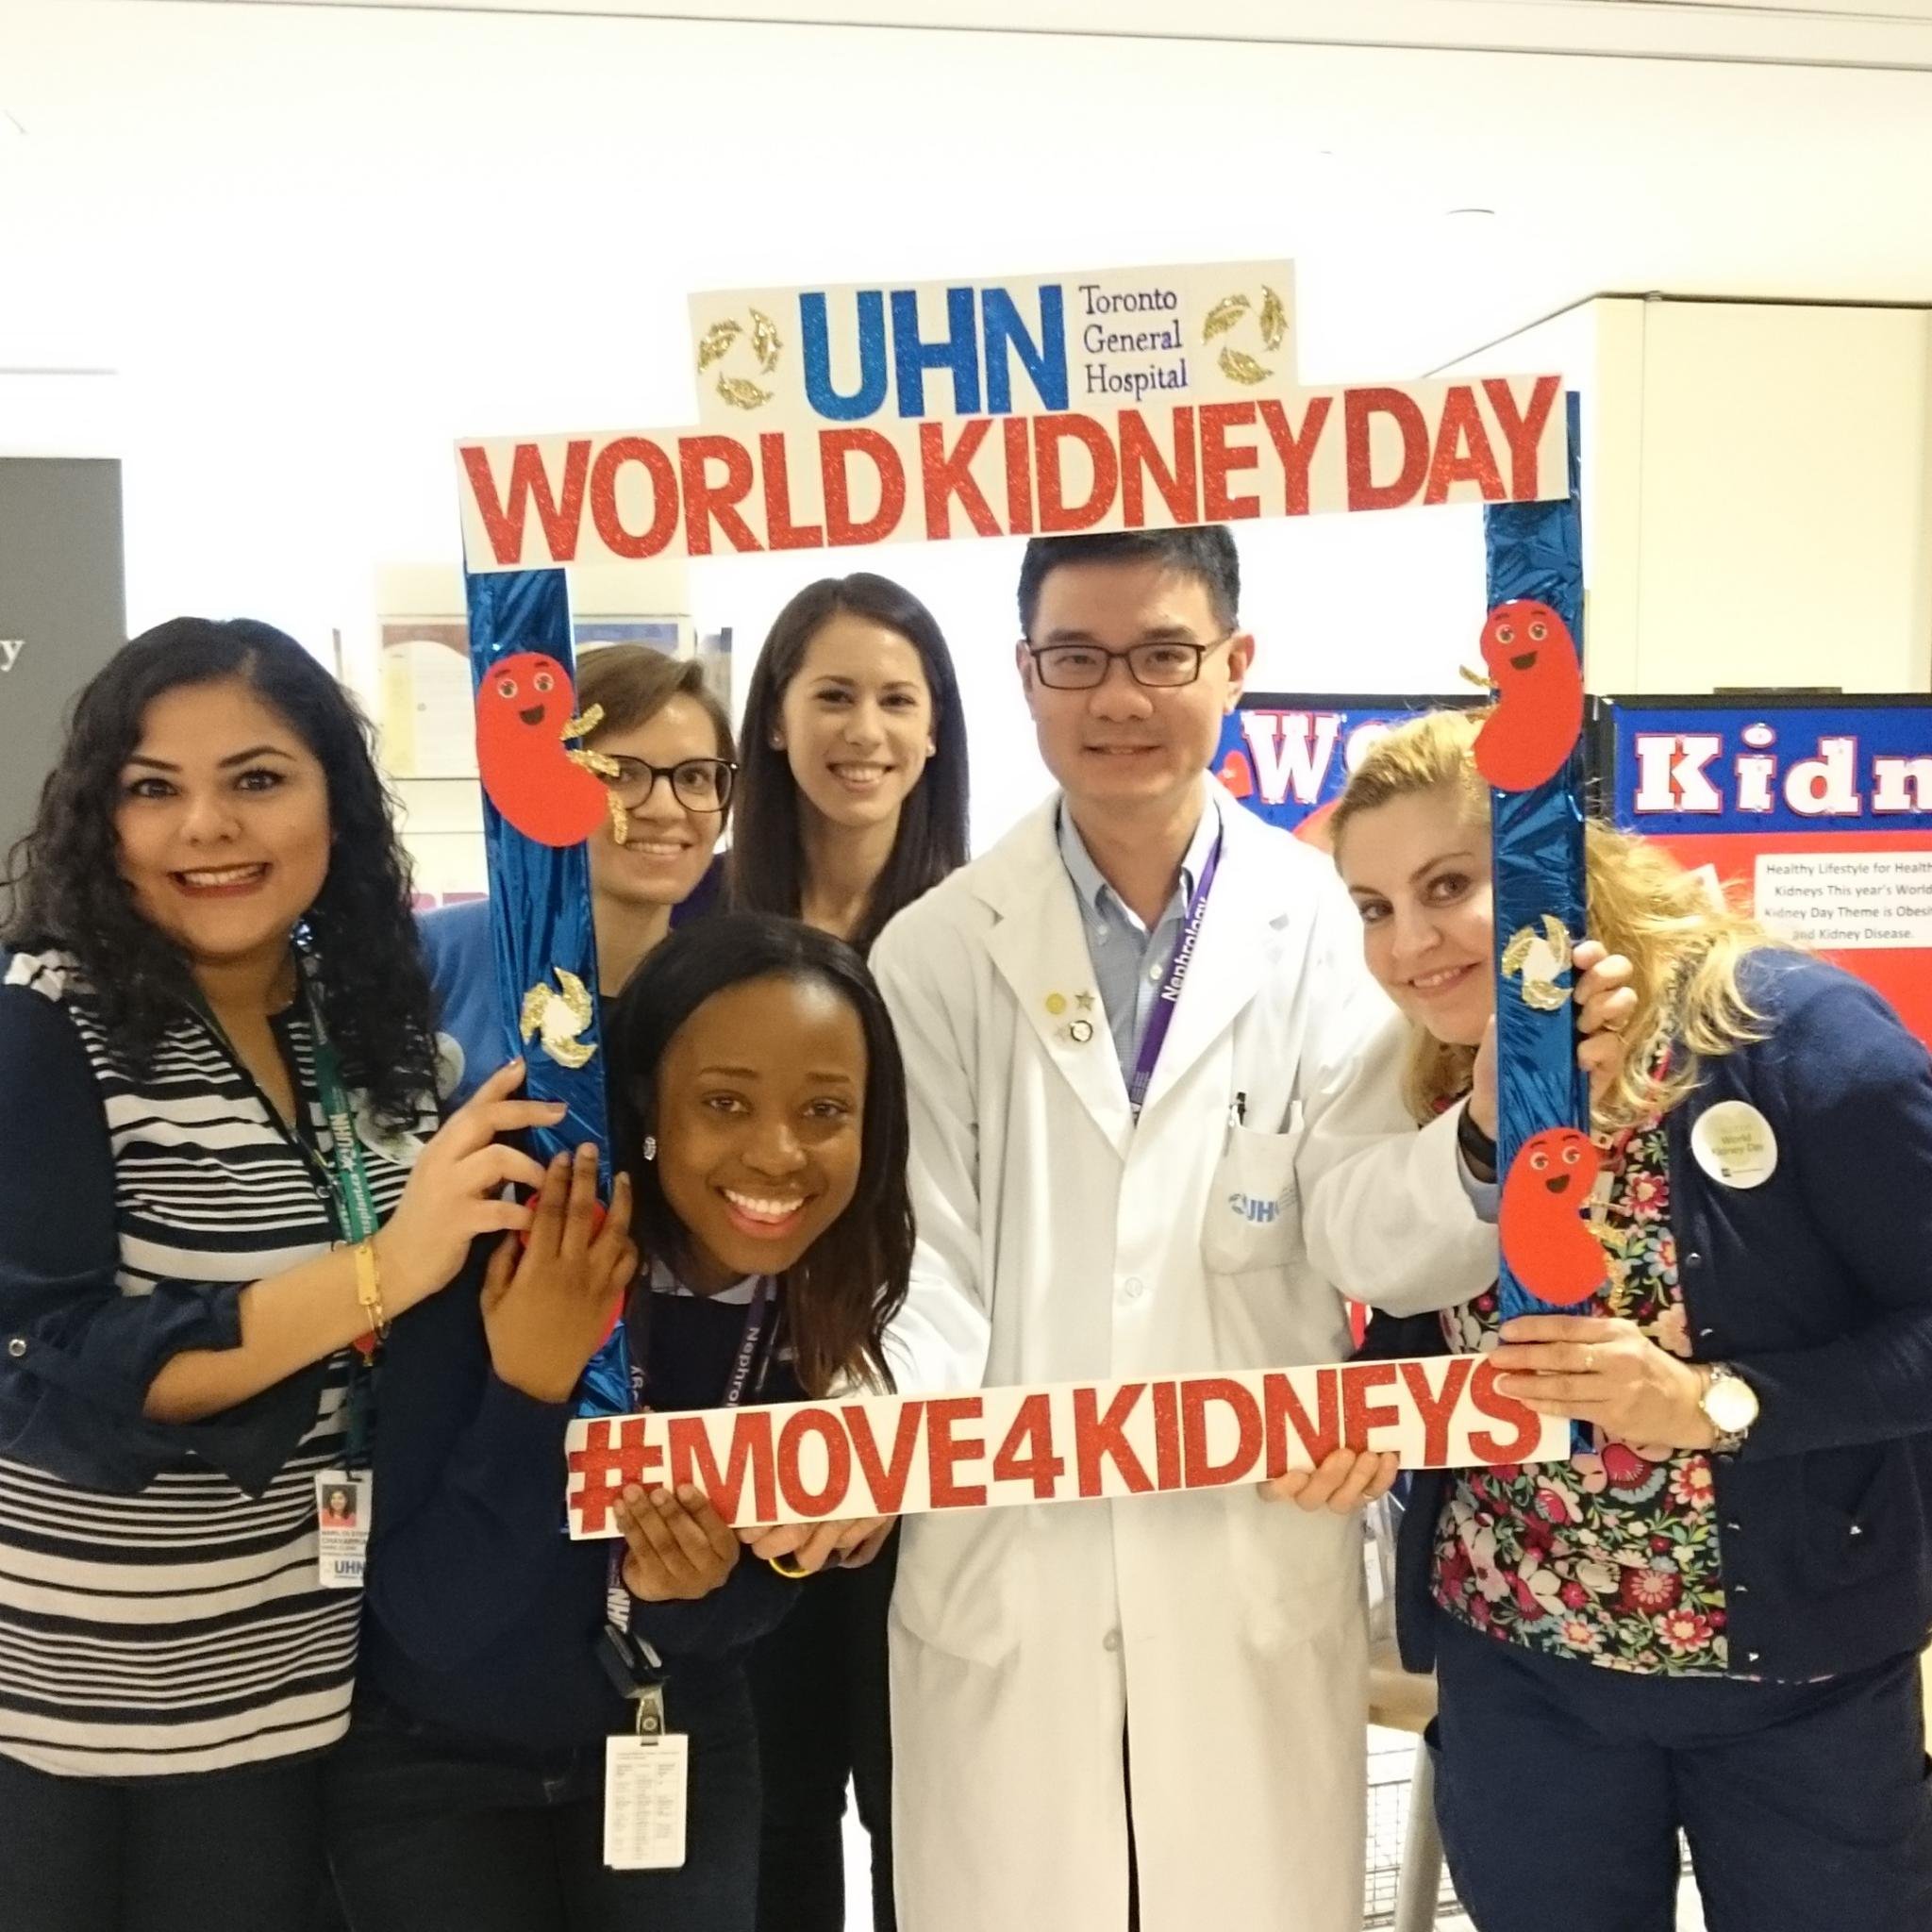 Follow along for World Kidney Day activities at University Health Network in Toronto, Canada. #UHN_WorldKidneyDay